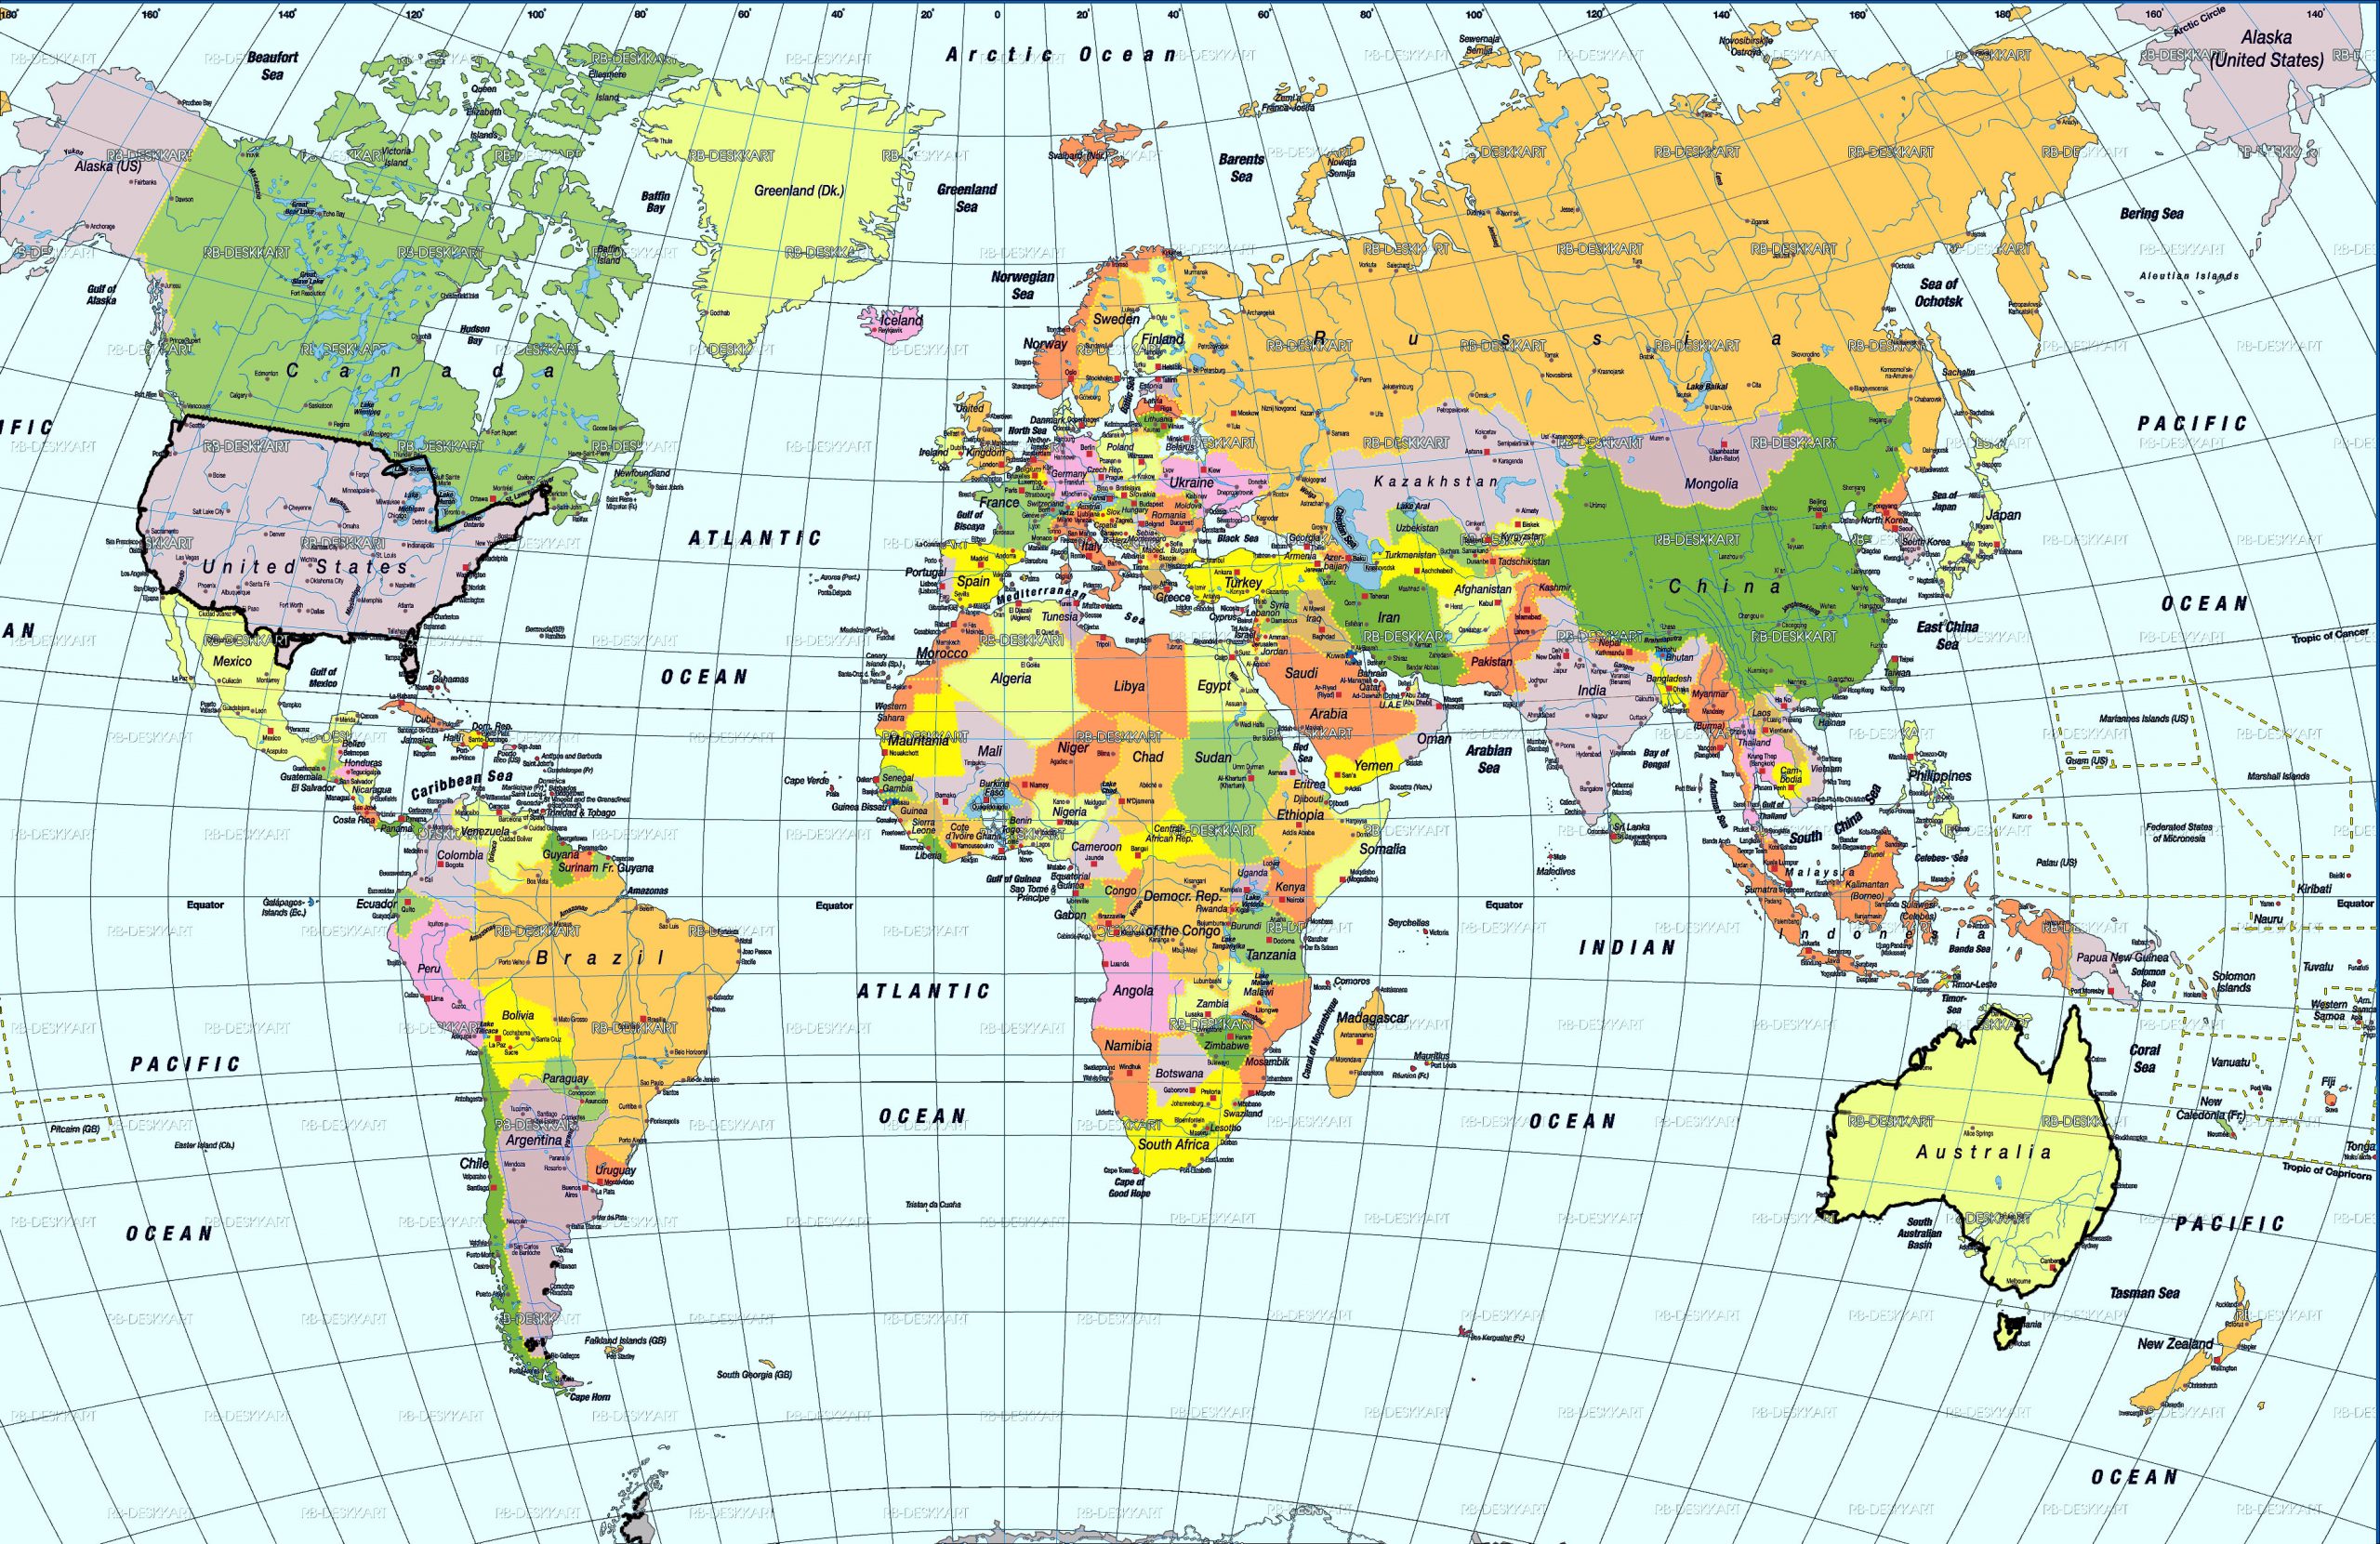 The World Map A Perfect Guide To Discover Any Place And Learn About